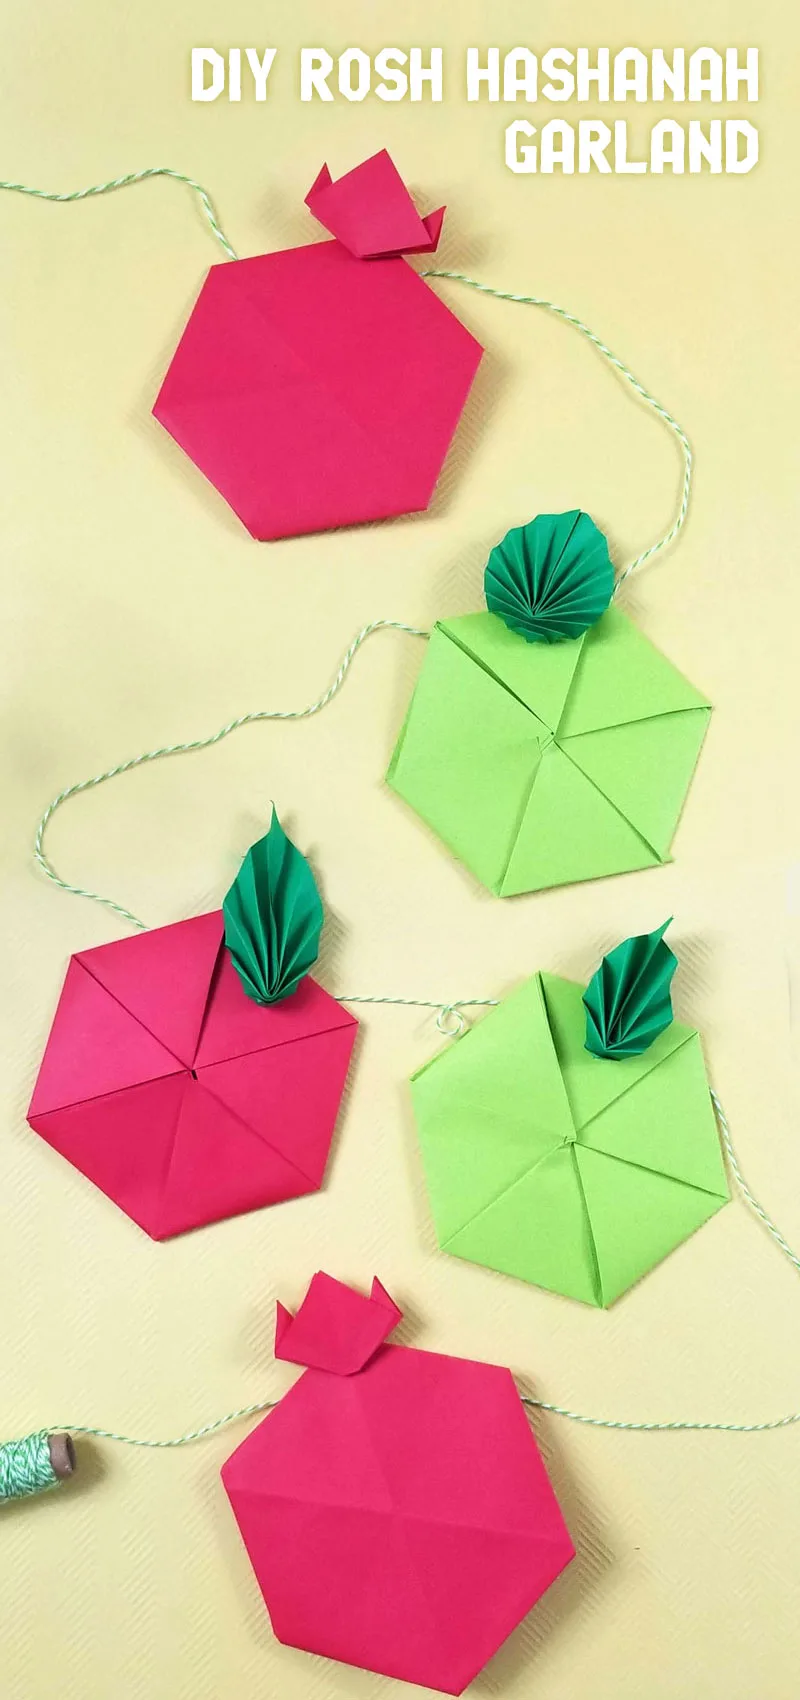 Make your own origami pomegranates and a fun Rosh Hashanah craft for kids and adults! Crafts for the High Holidays and Jewish new year can be hard to come by but this easy paper craft can double as fun home decor for the holidays